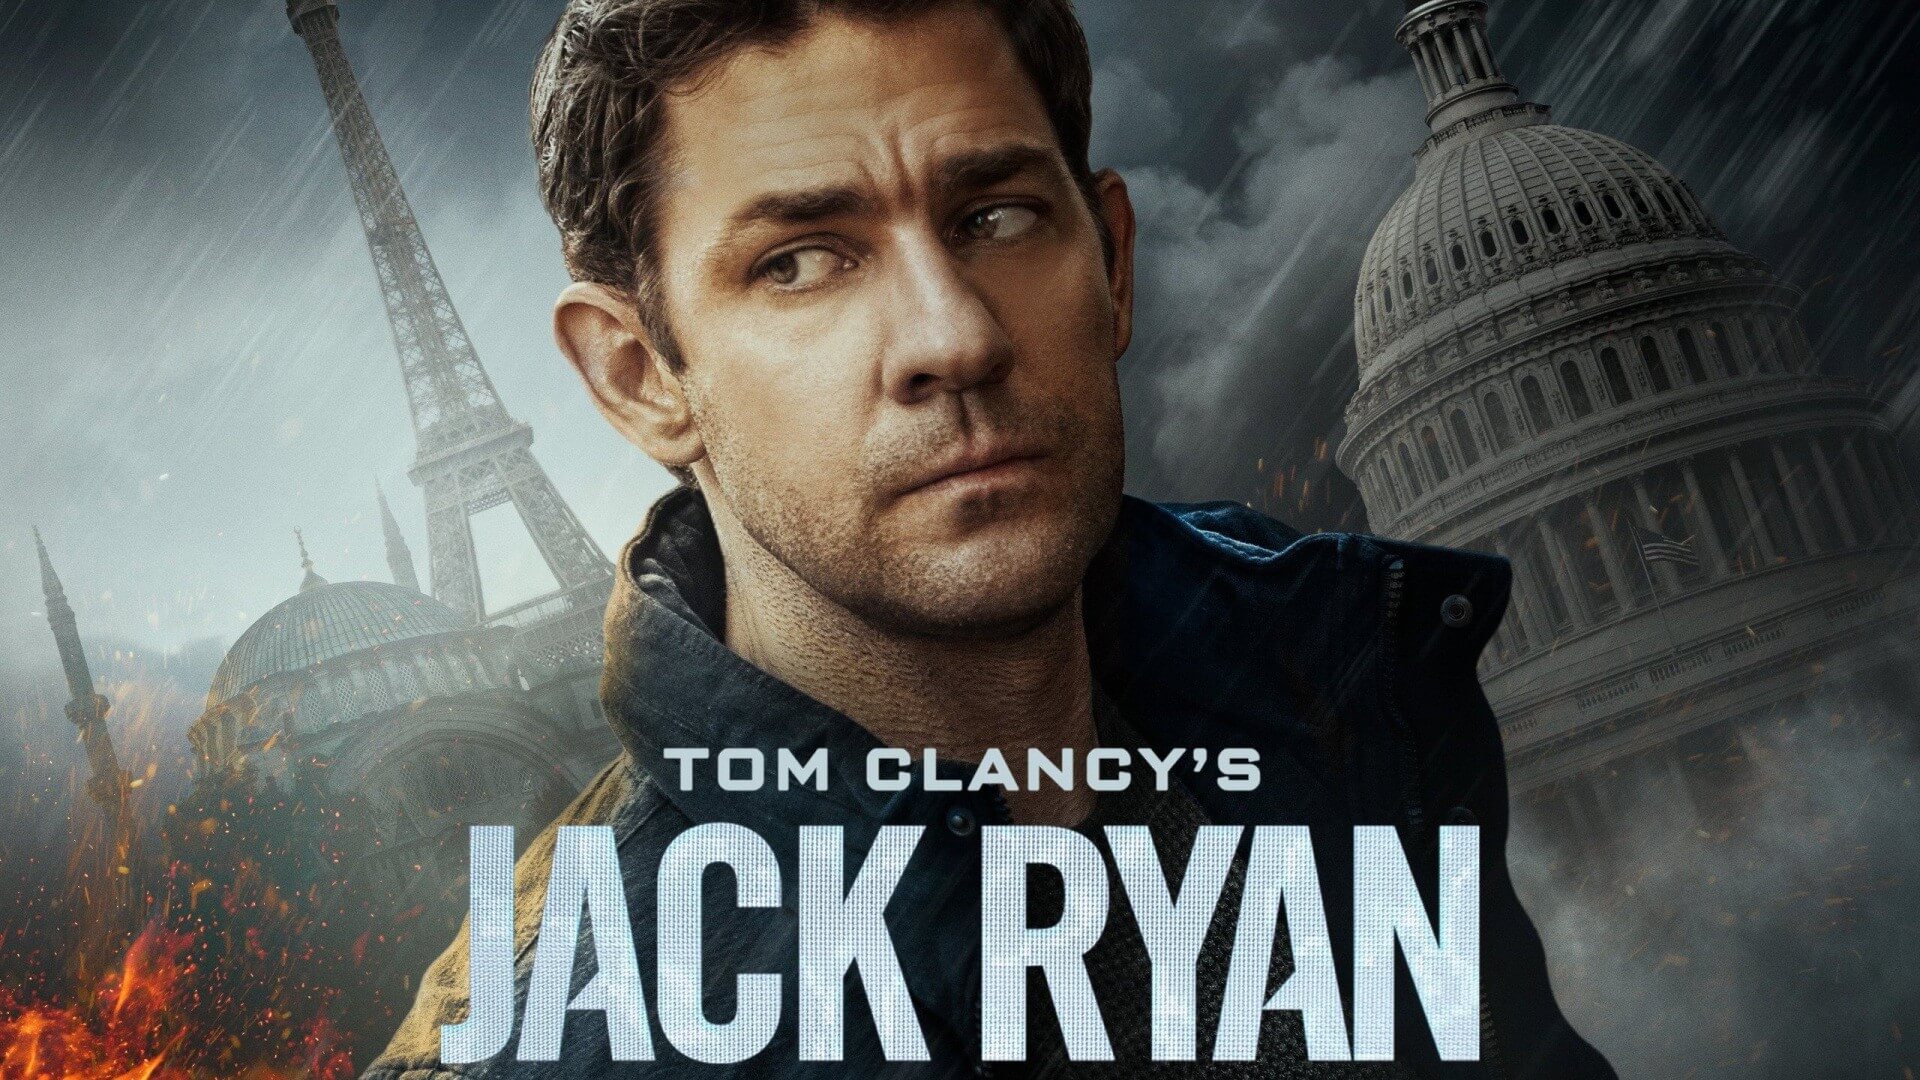 Jack Ryan Season 3 Release Date, Plot Details Next Missions will be Very Tough for Jack Ryan